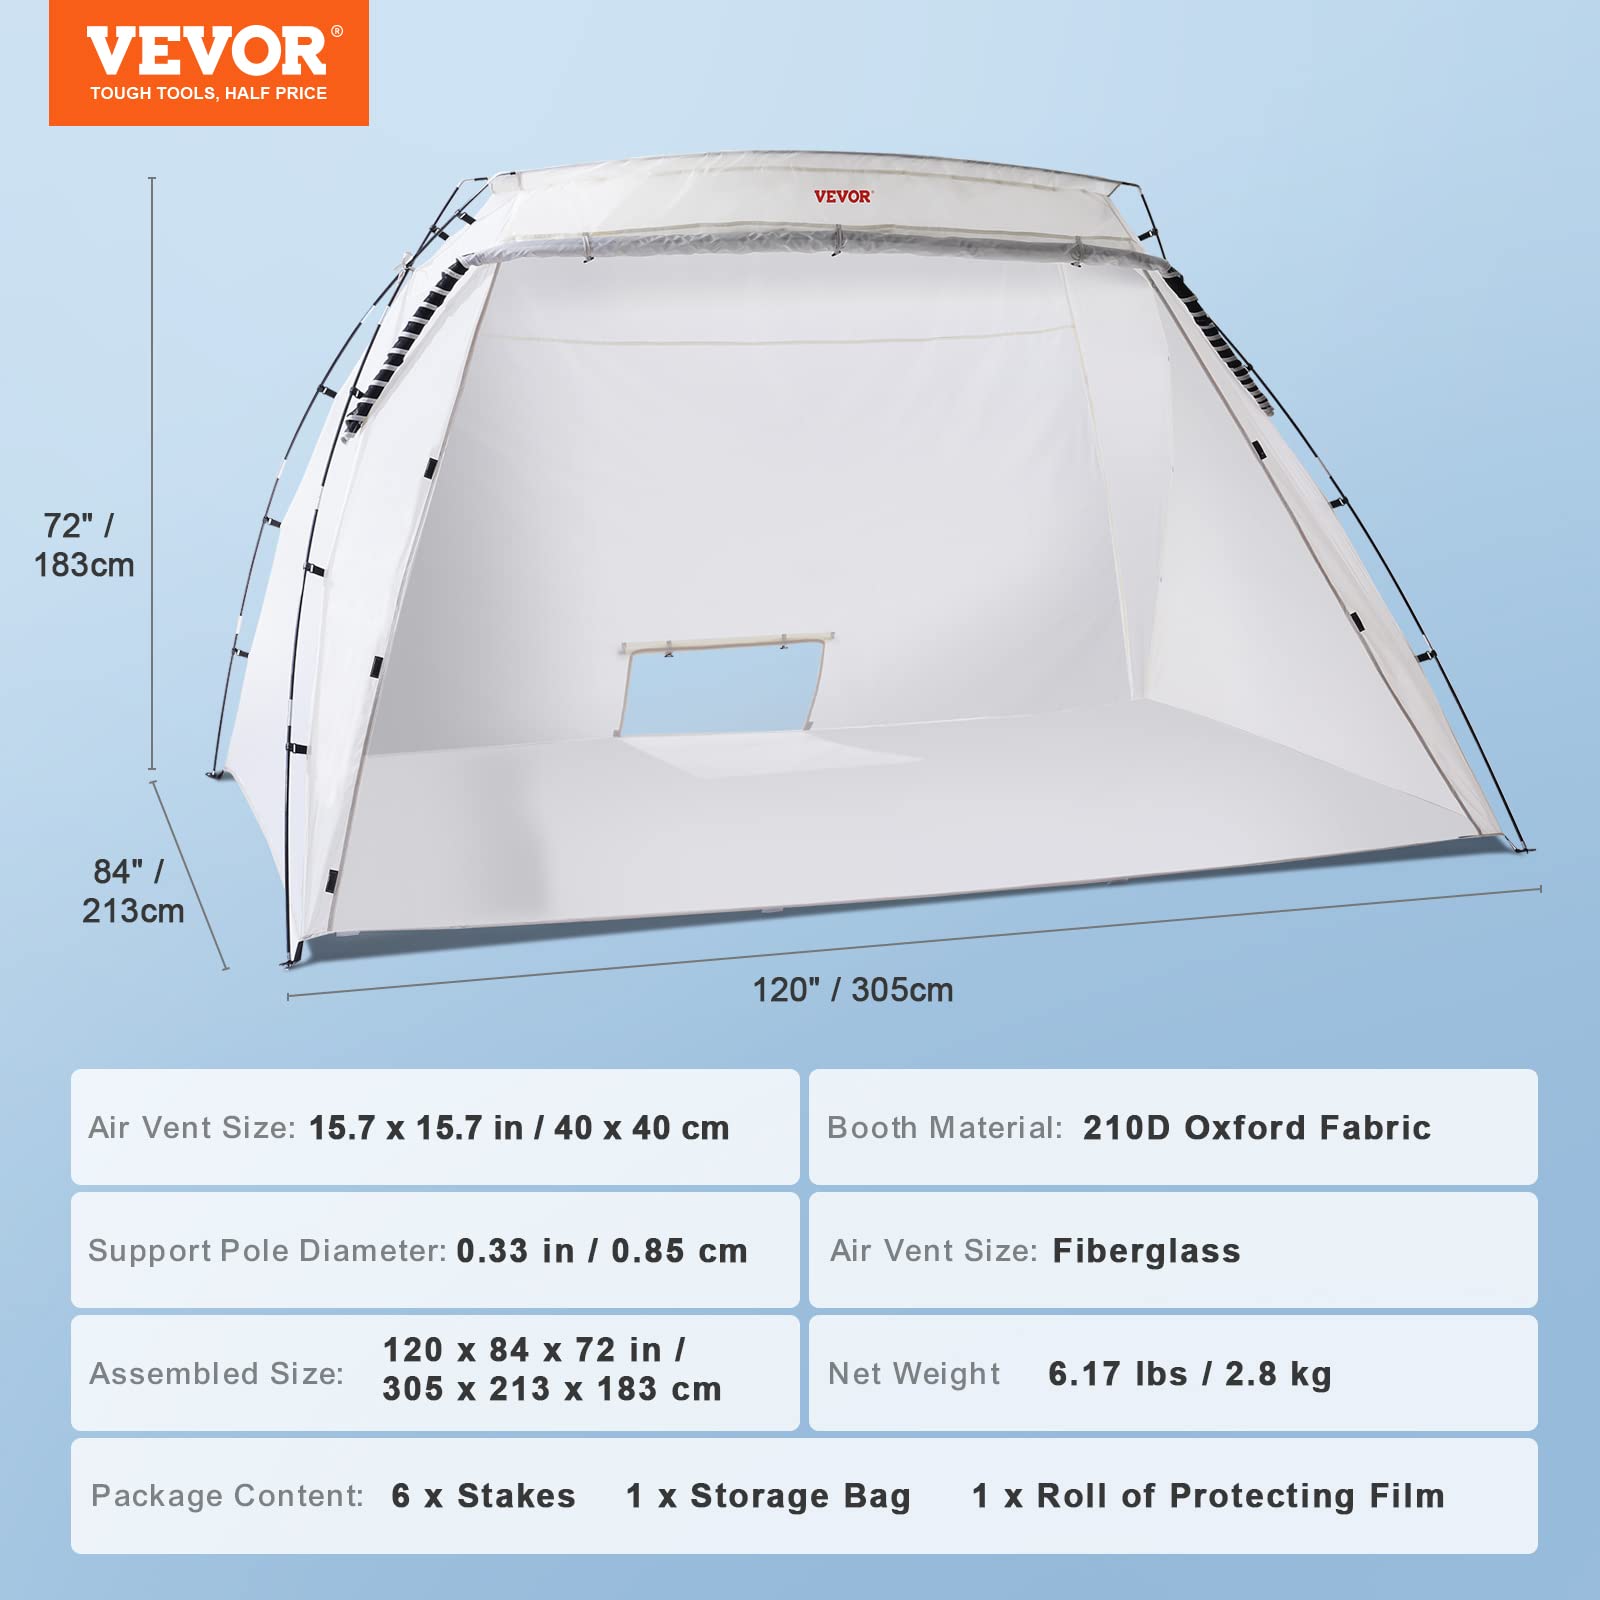 VEVOR Portable Paint Booth,10x7x6ft Larger Spray Paint Tent with Built-in Floor & Mesh Screen & Windproof Hooks, Painting Tent Station for Furniture DIY Hobby Tool, Spray Paint Shelter,Extra Large